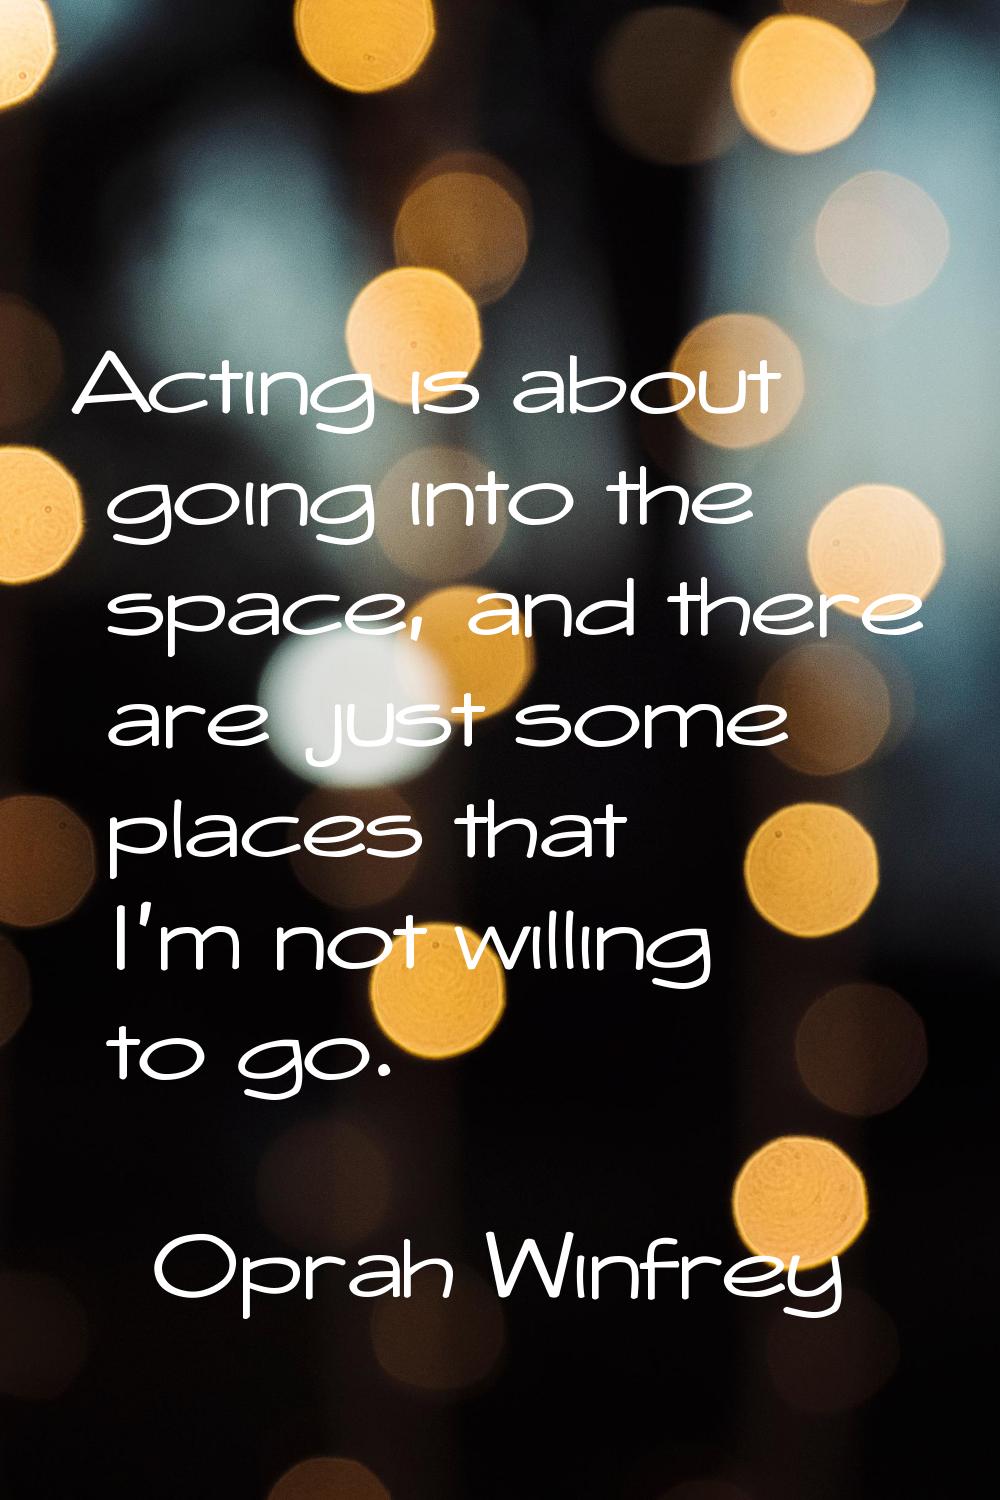 Acting is about going into the space, and there are just some places that I'm not willing to go.